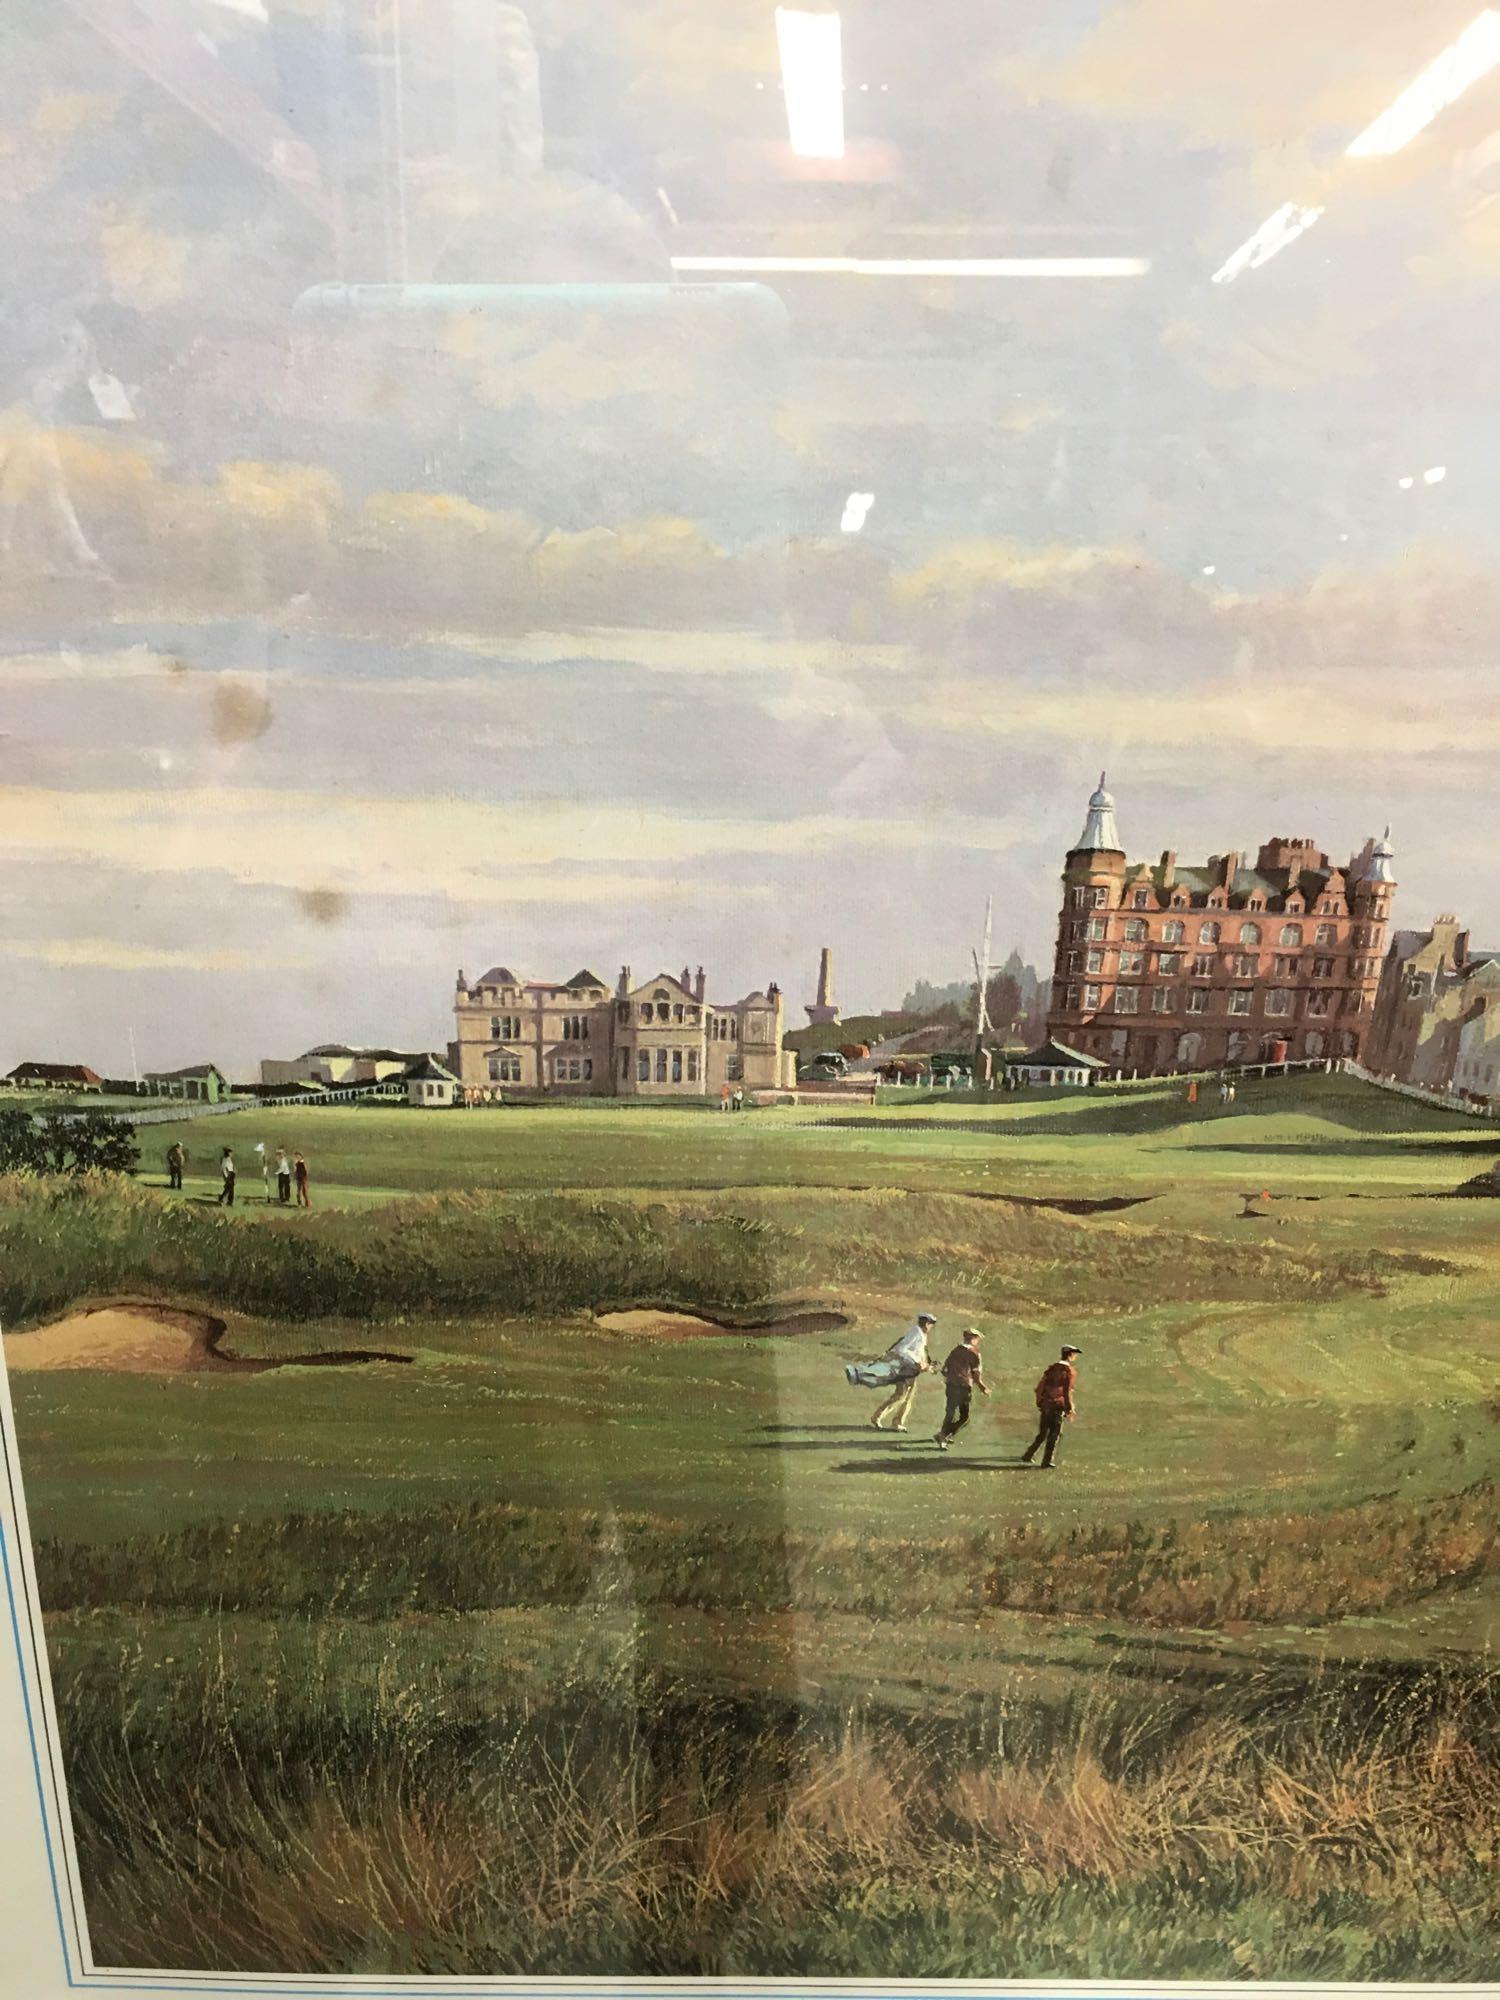 The Old Course St. Andrews, 17th Hole and the Swilcan Bridge, by Donald M. Shearer